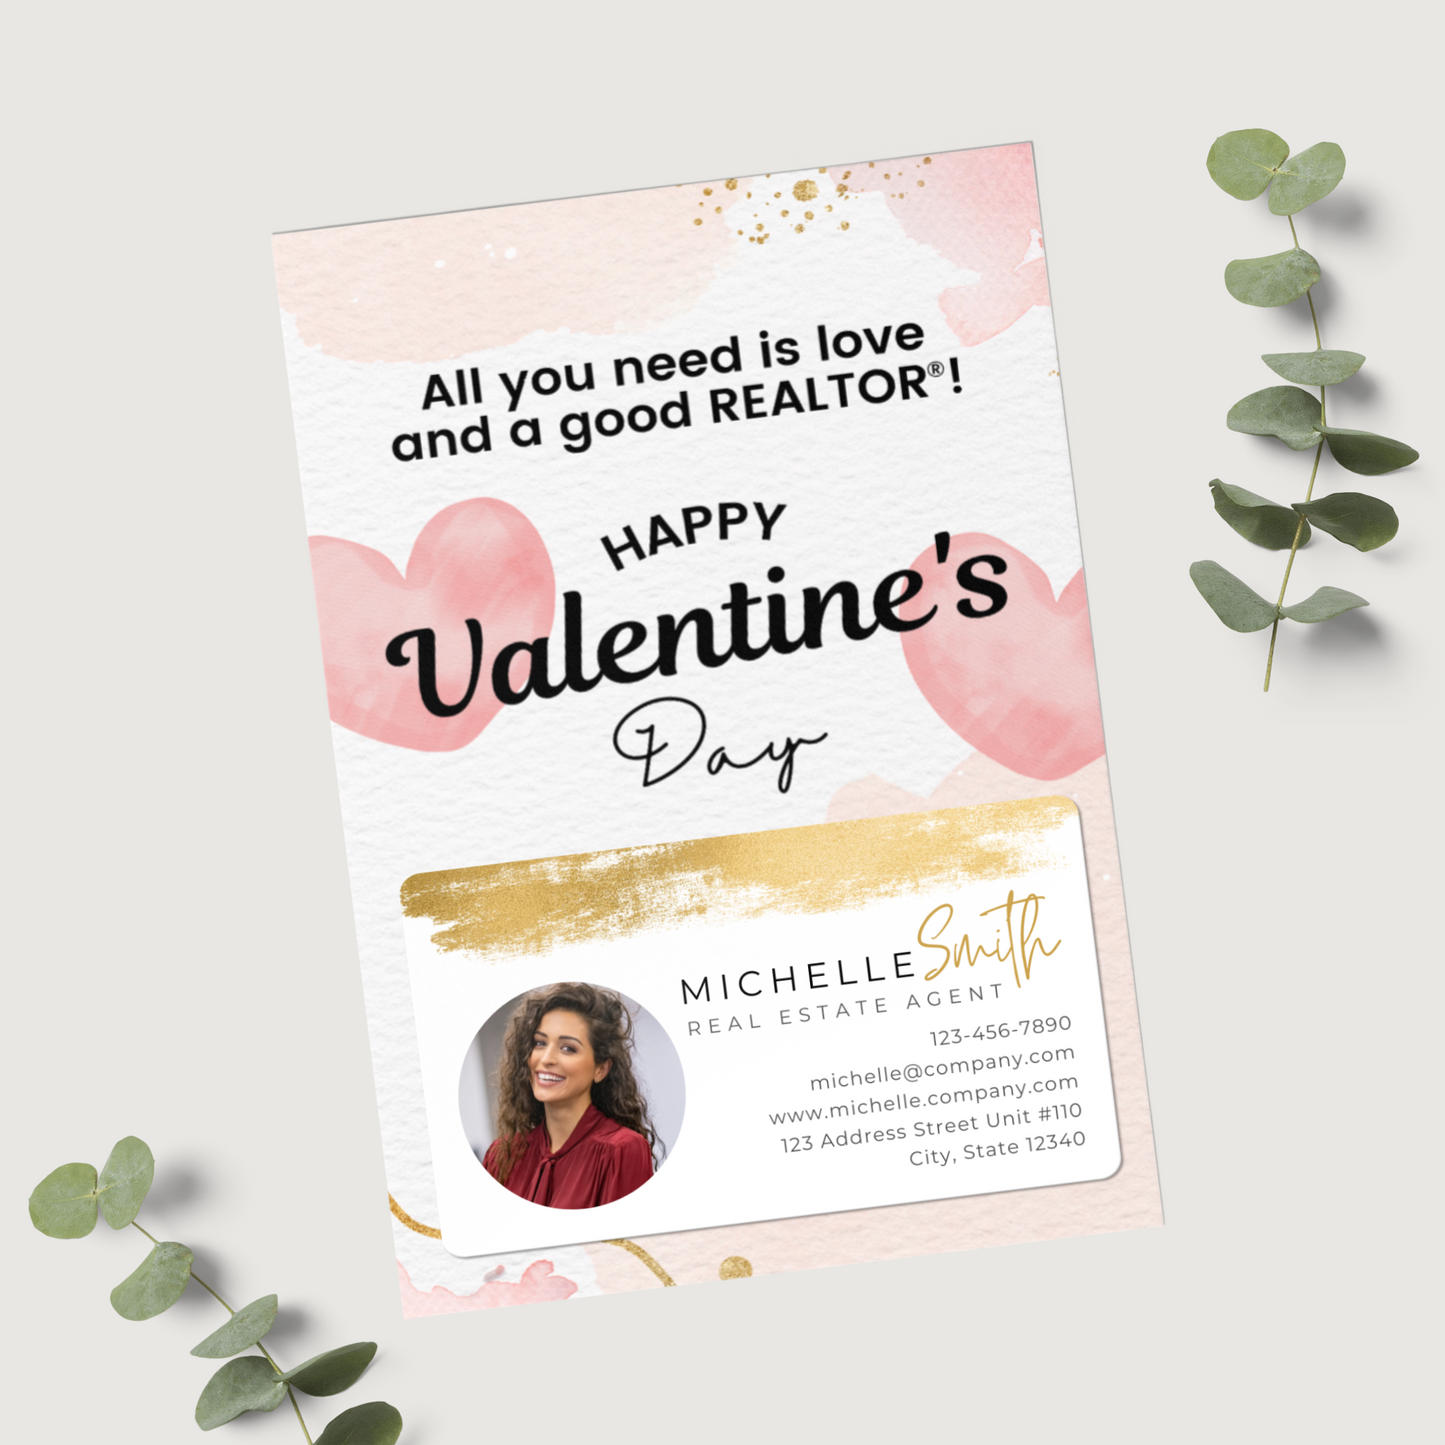 All You Need is Love and A Good REALTOR® - Set of Valentines Postcard Mailers